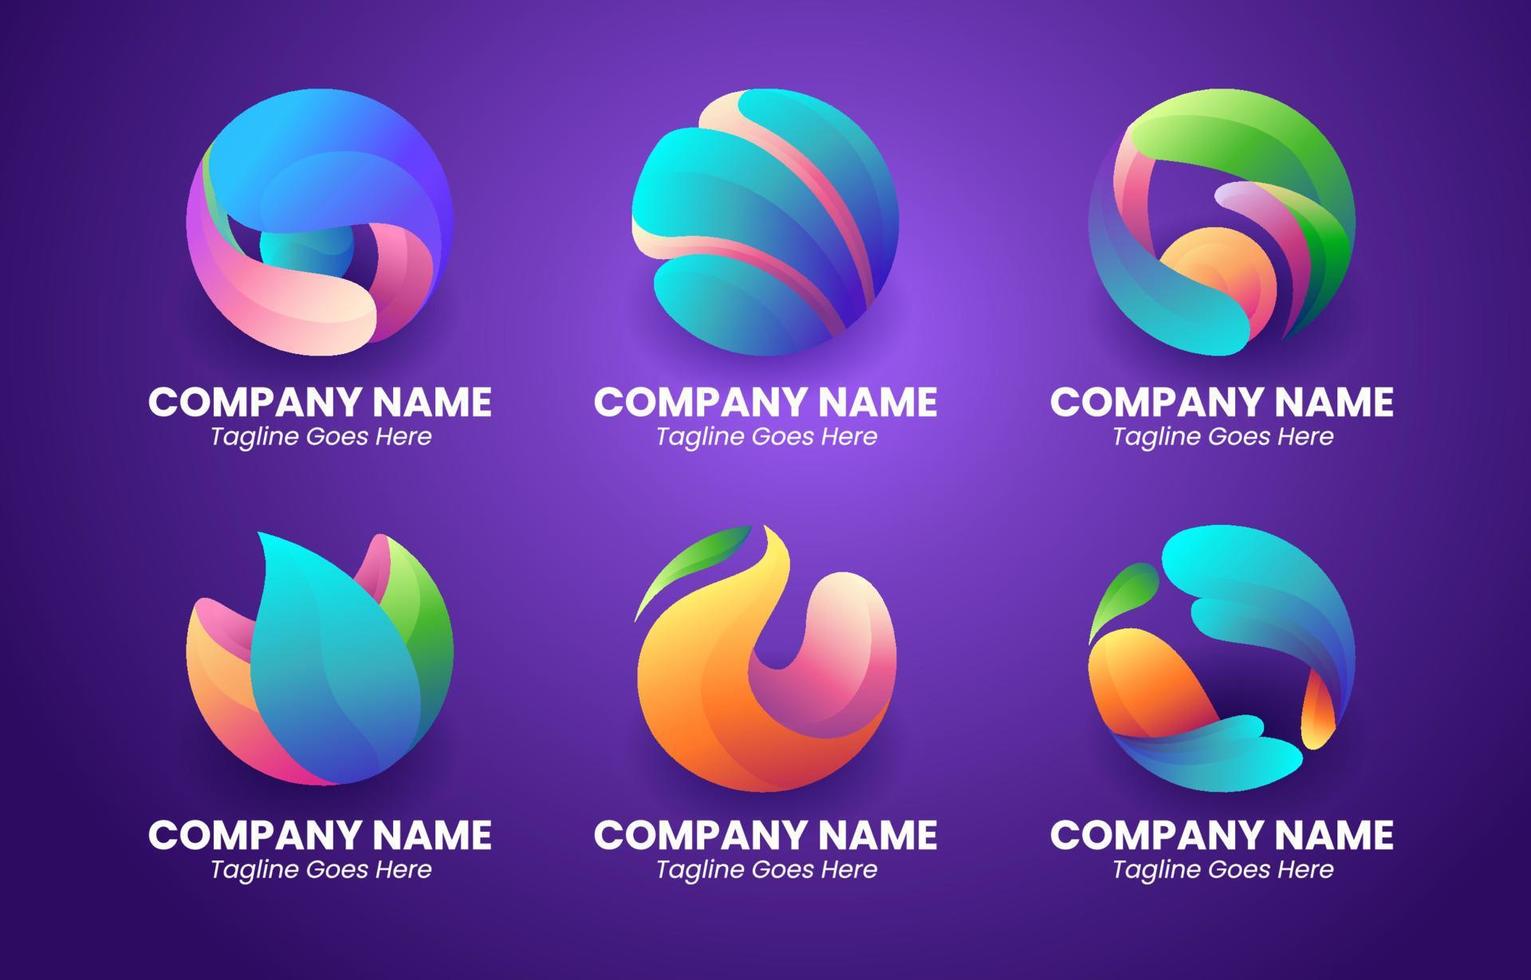 Sphere Abstract Corporate Logo vector